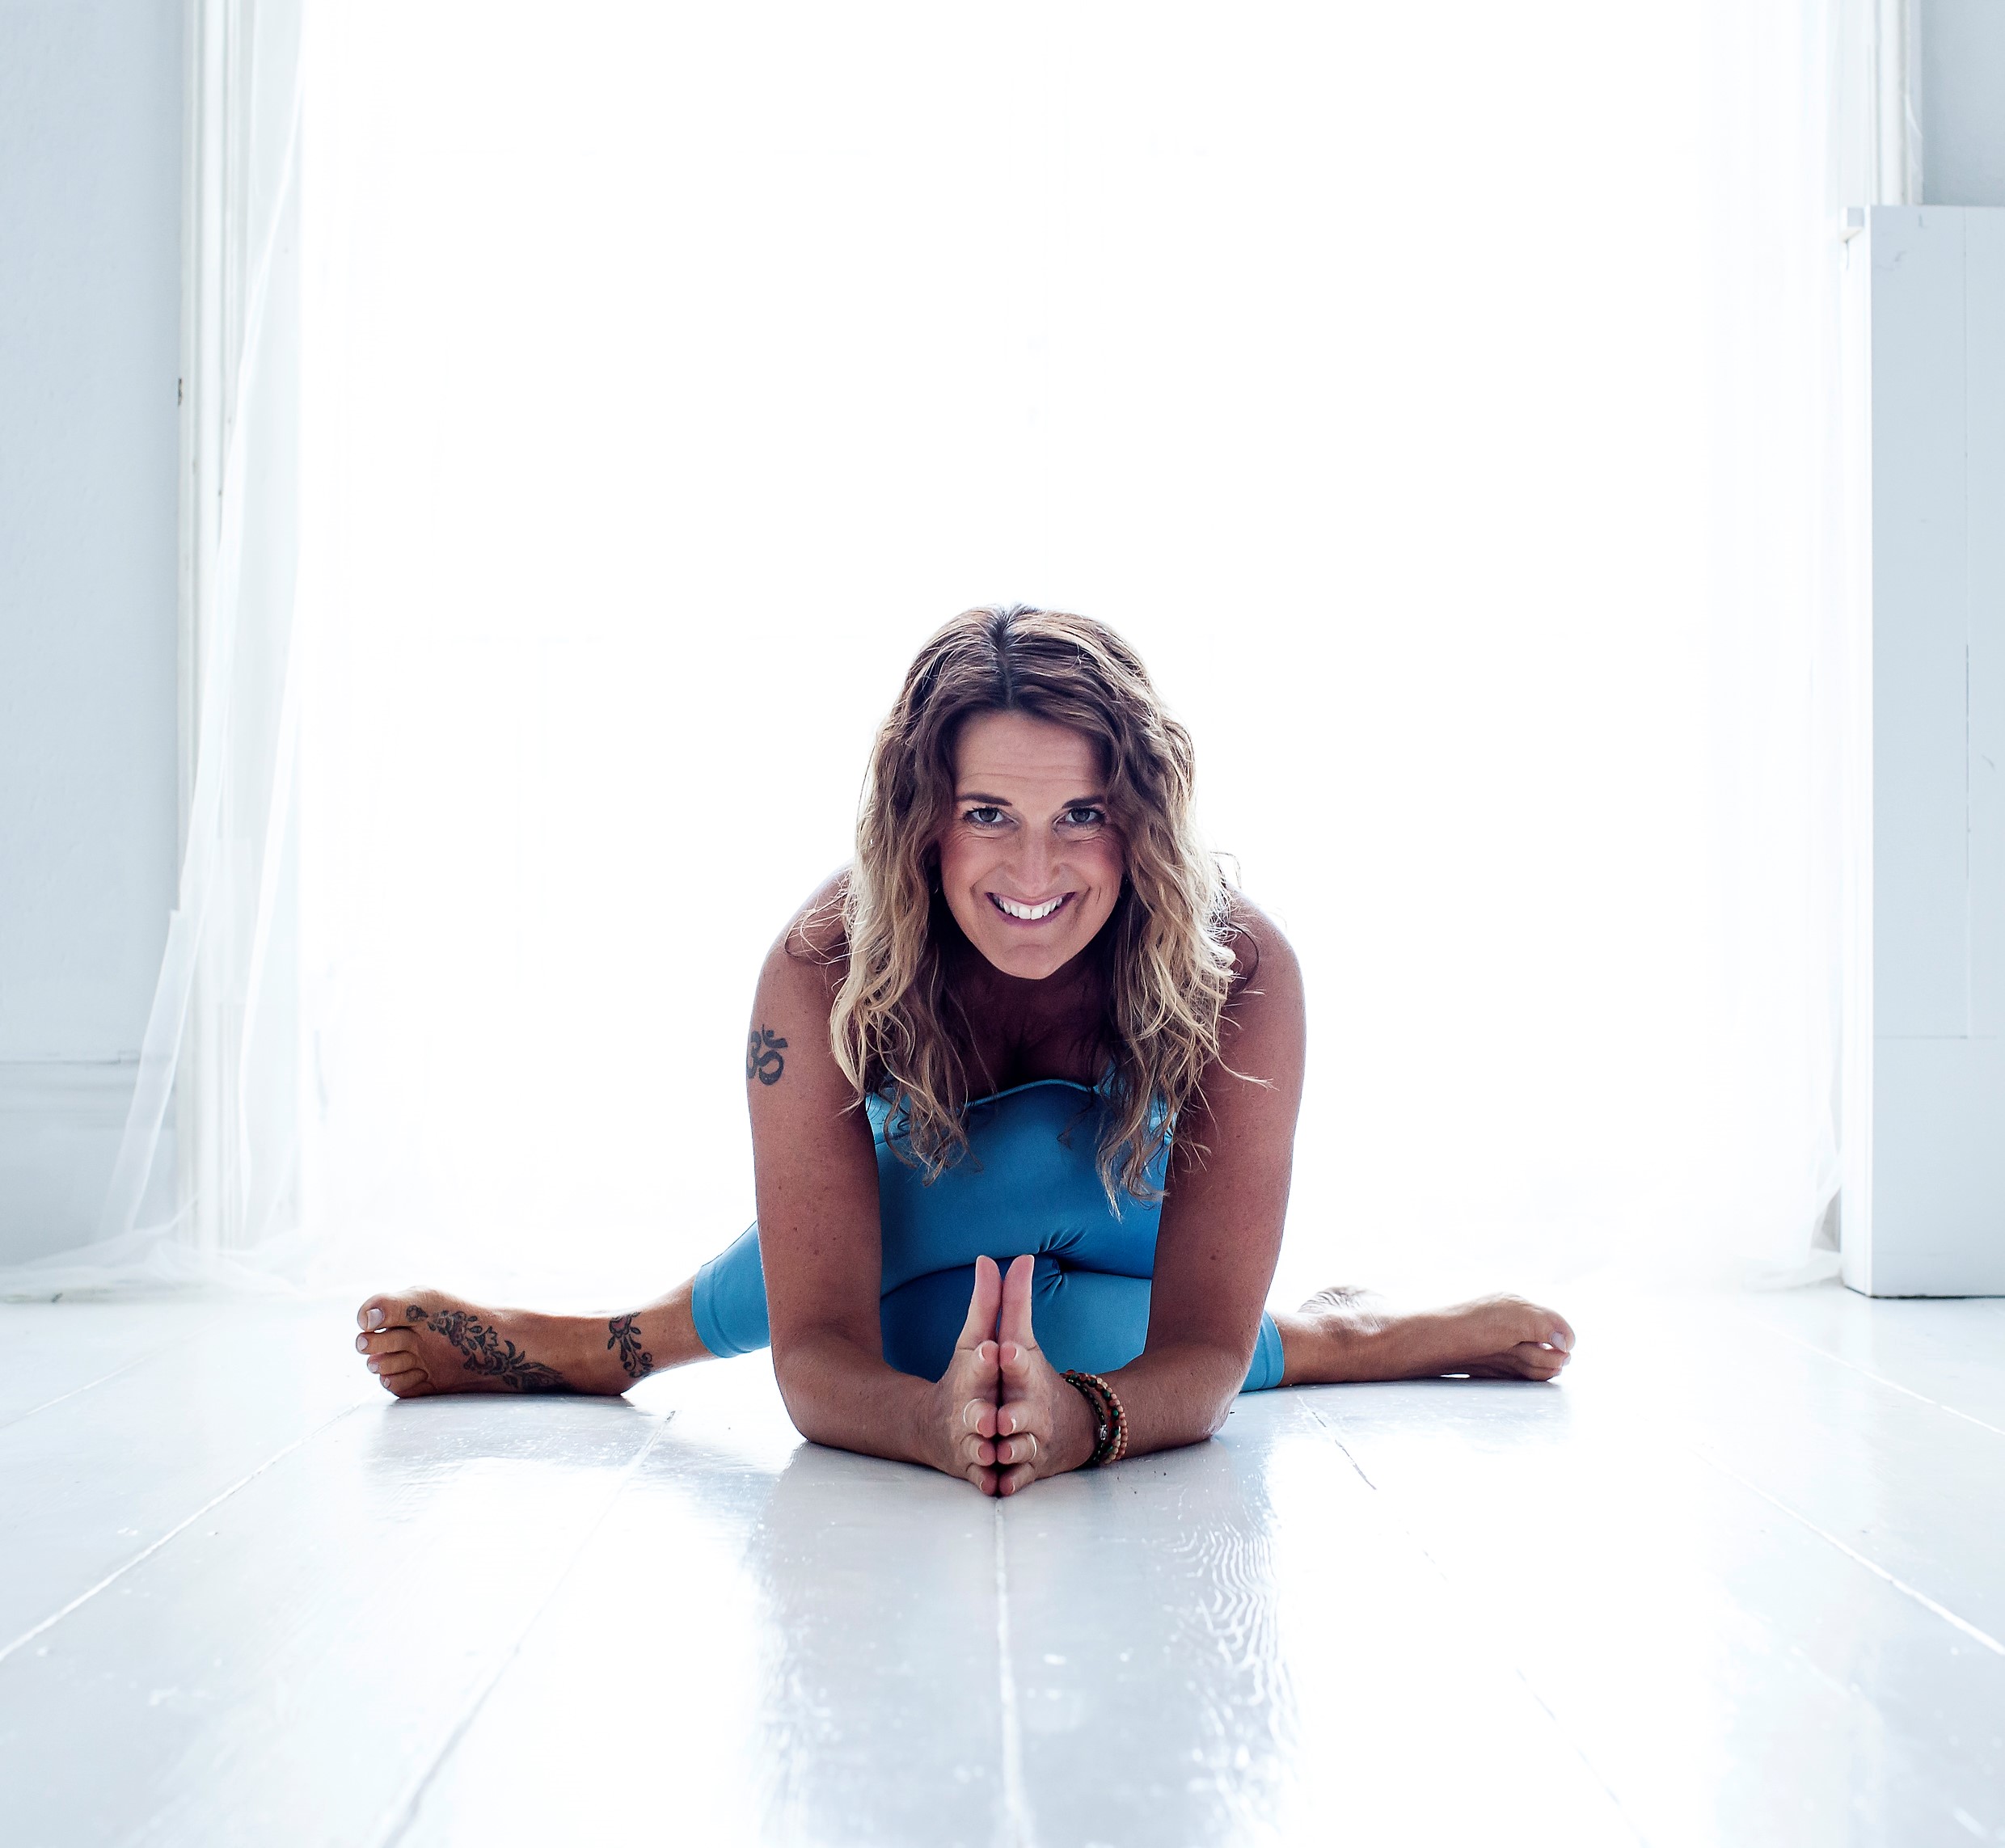 Somatic's and Yin yoga masterclass – 'Happy Hips' with Brigitte Riley - Price £30 